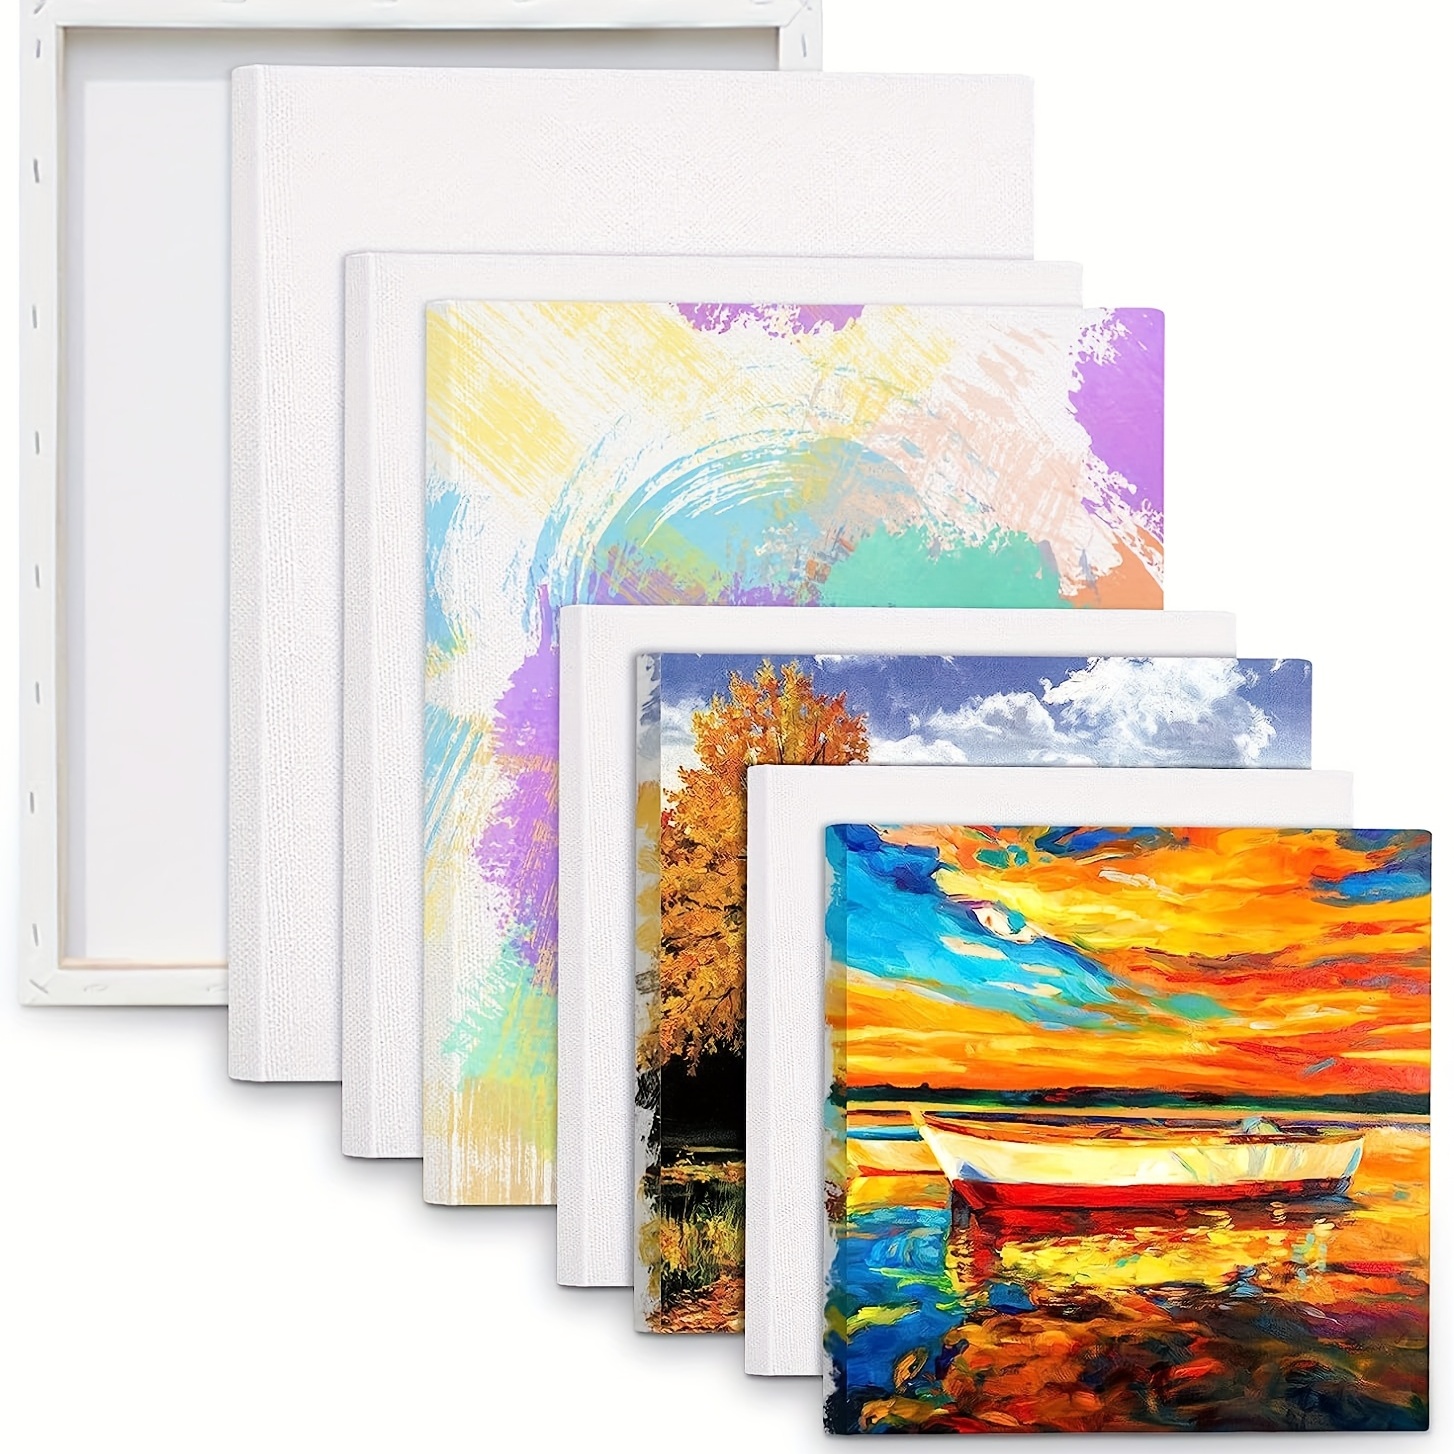  Stretched Canvases for Painting 12 Pack 5x7, 8x10, 9x12, 11x14  Inch, 100% Cotton 12.3 oz Triple Primed Painting Canvas, 3/4 Profile  Acid-Free Art Canvas for Acrylic Pouring Oil Watercolor Painting